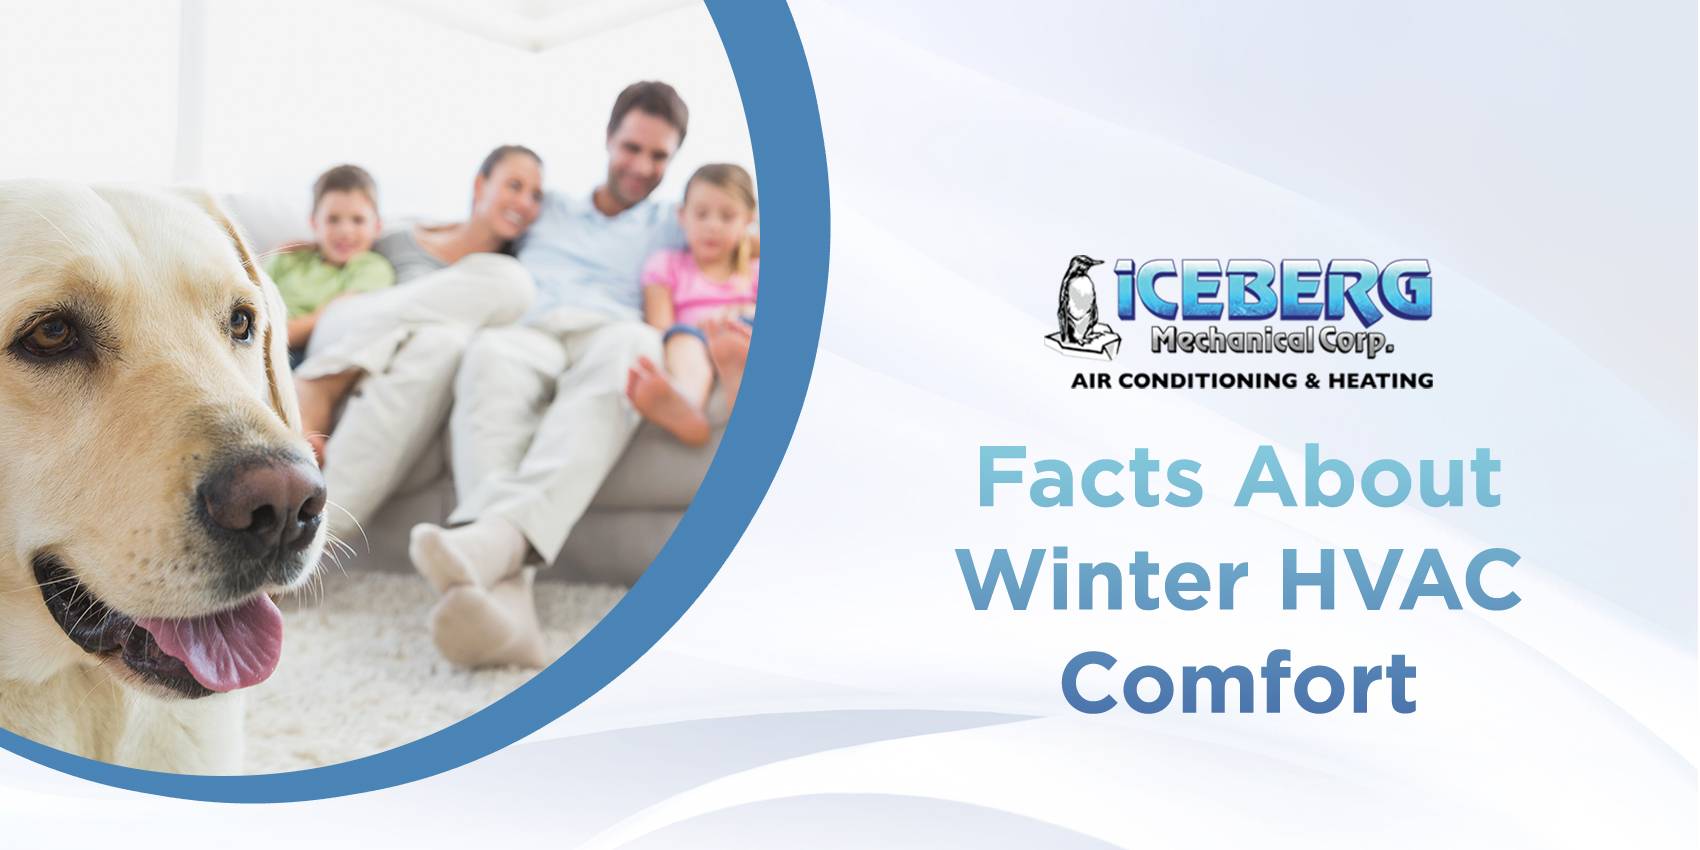 Facts About Winter HVAC comfort_IceBerg